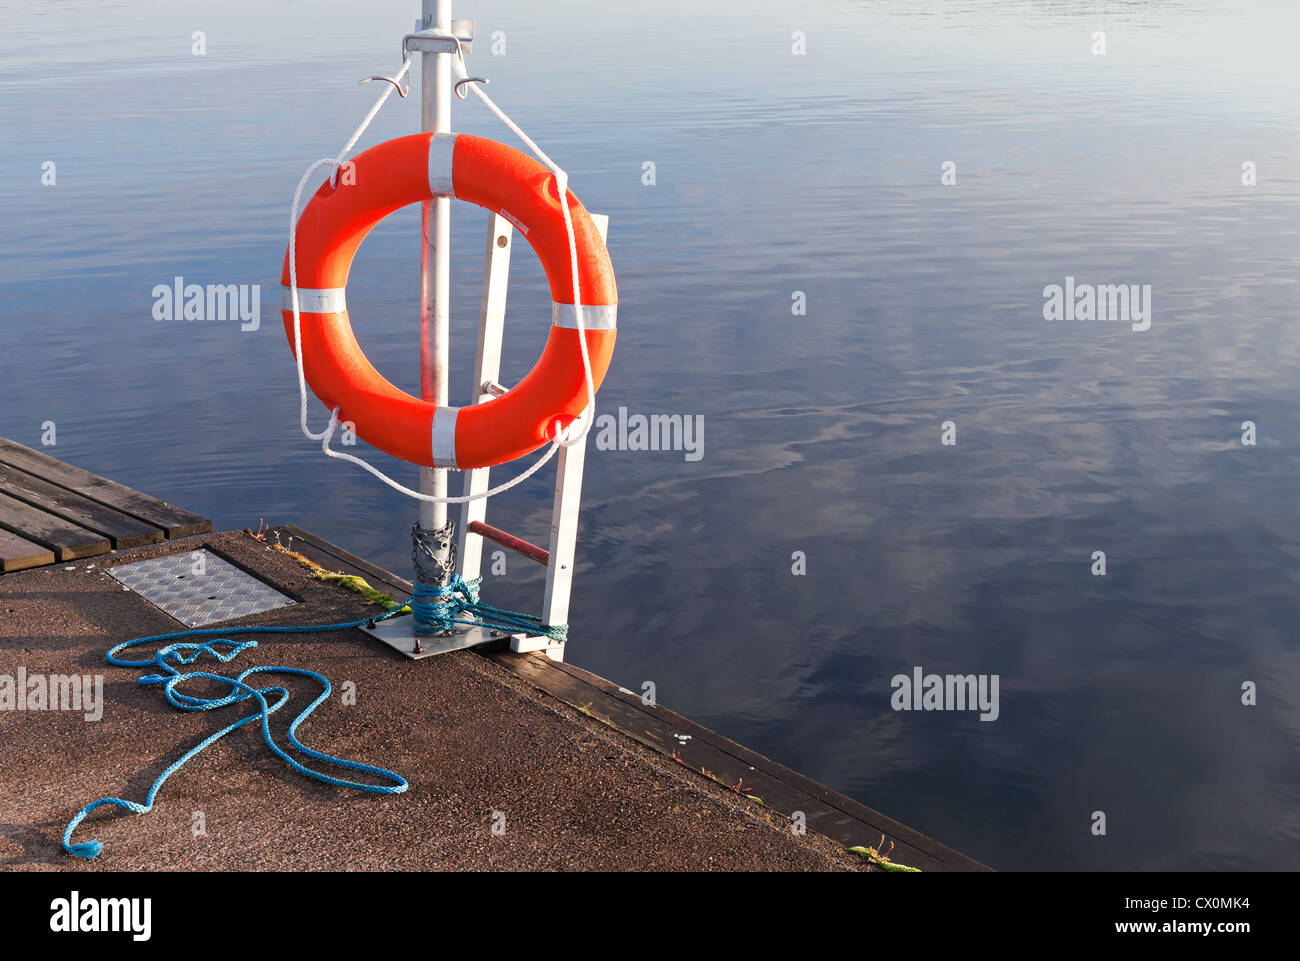 Safety equipment. Red lifebuoy on the pier Stock Photo